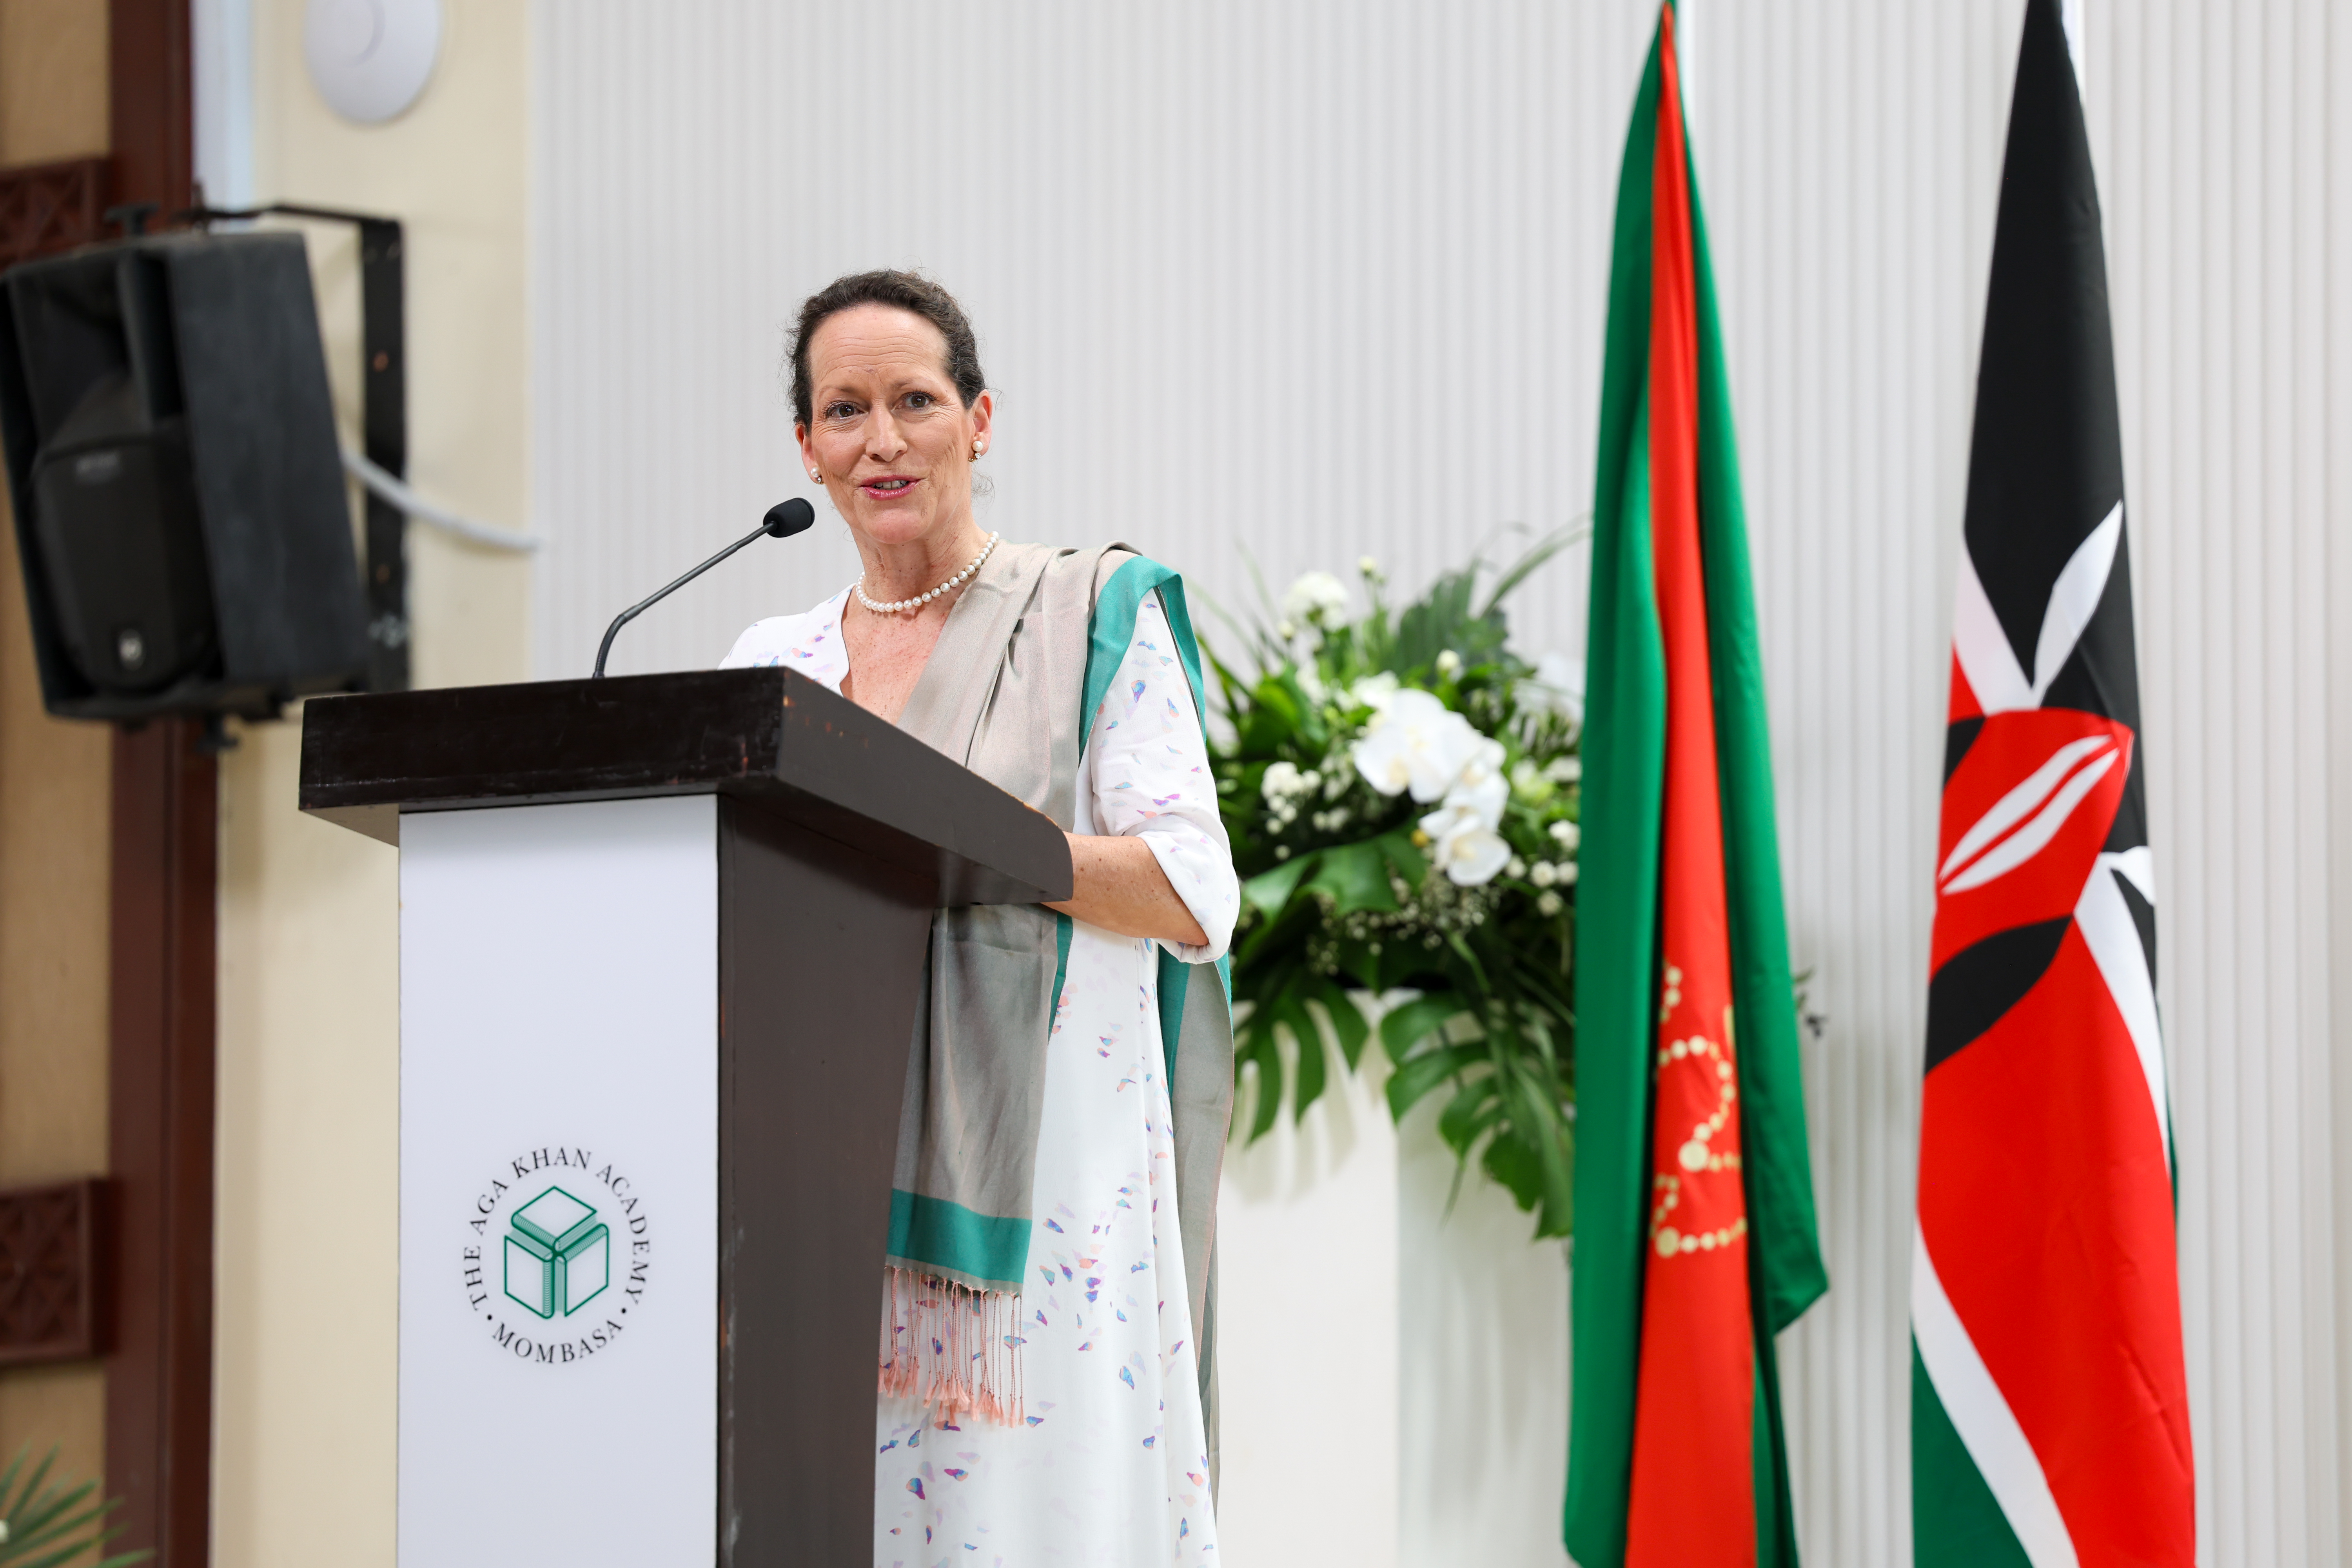 Princess Zahra Aga Khan delivering her address at the Academy.